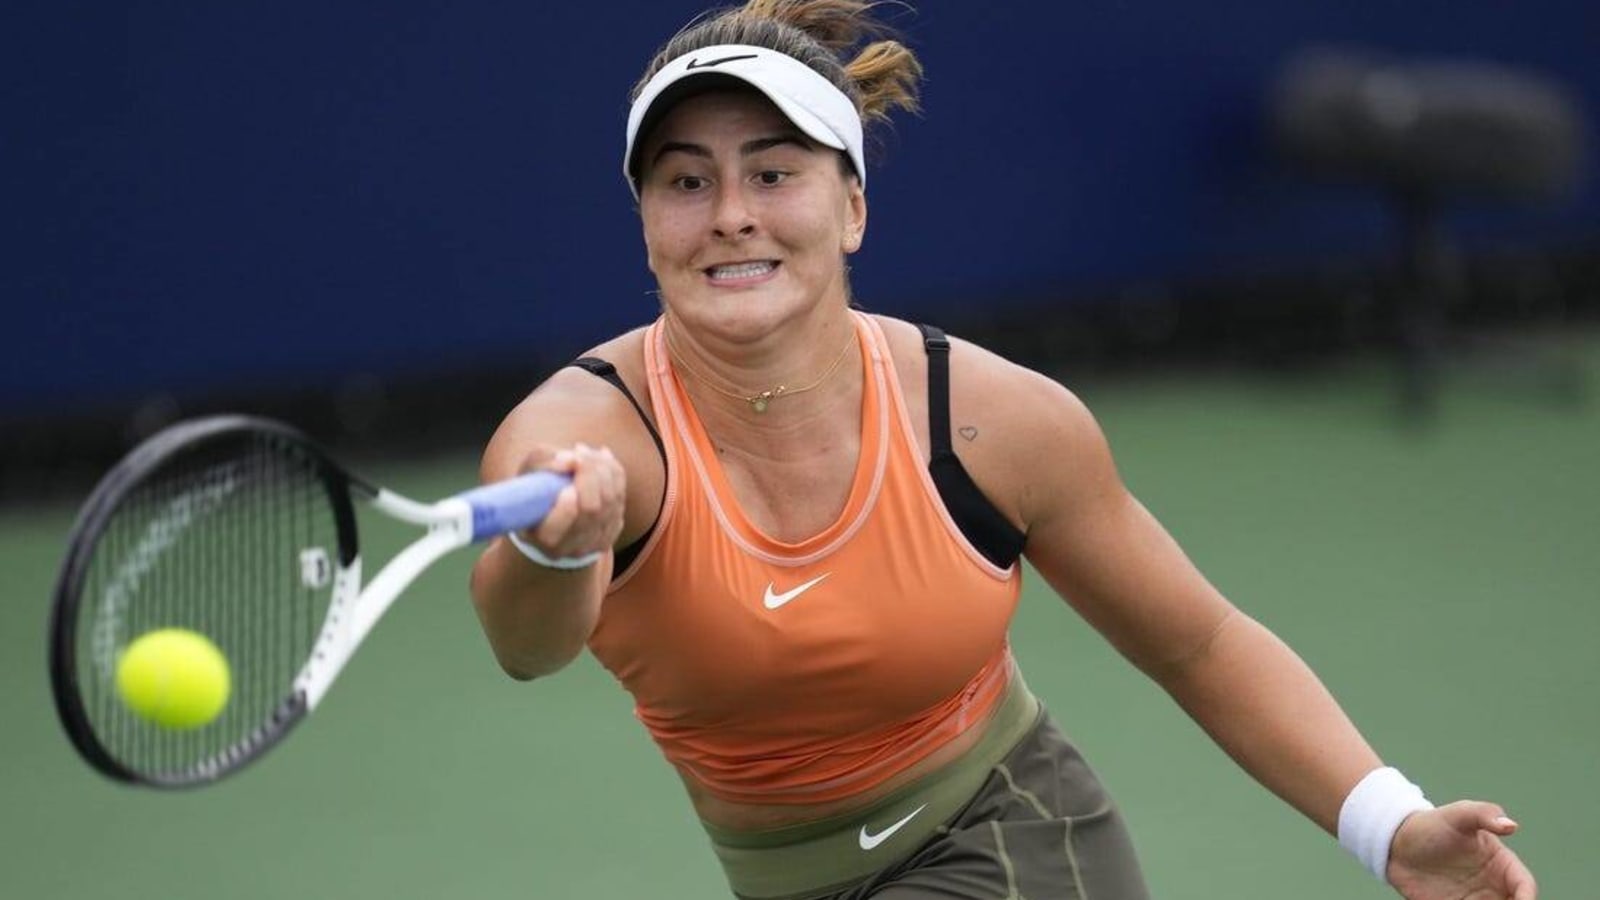 Roundup: Bianca Andreescu completes epic rally in Adelaide